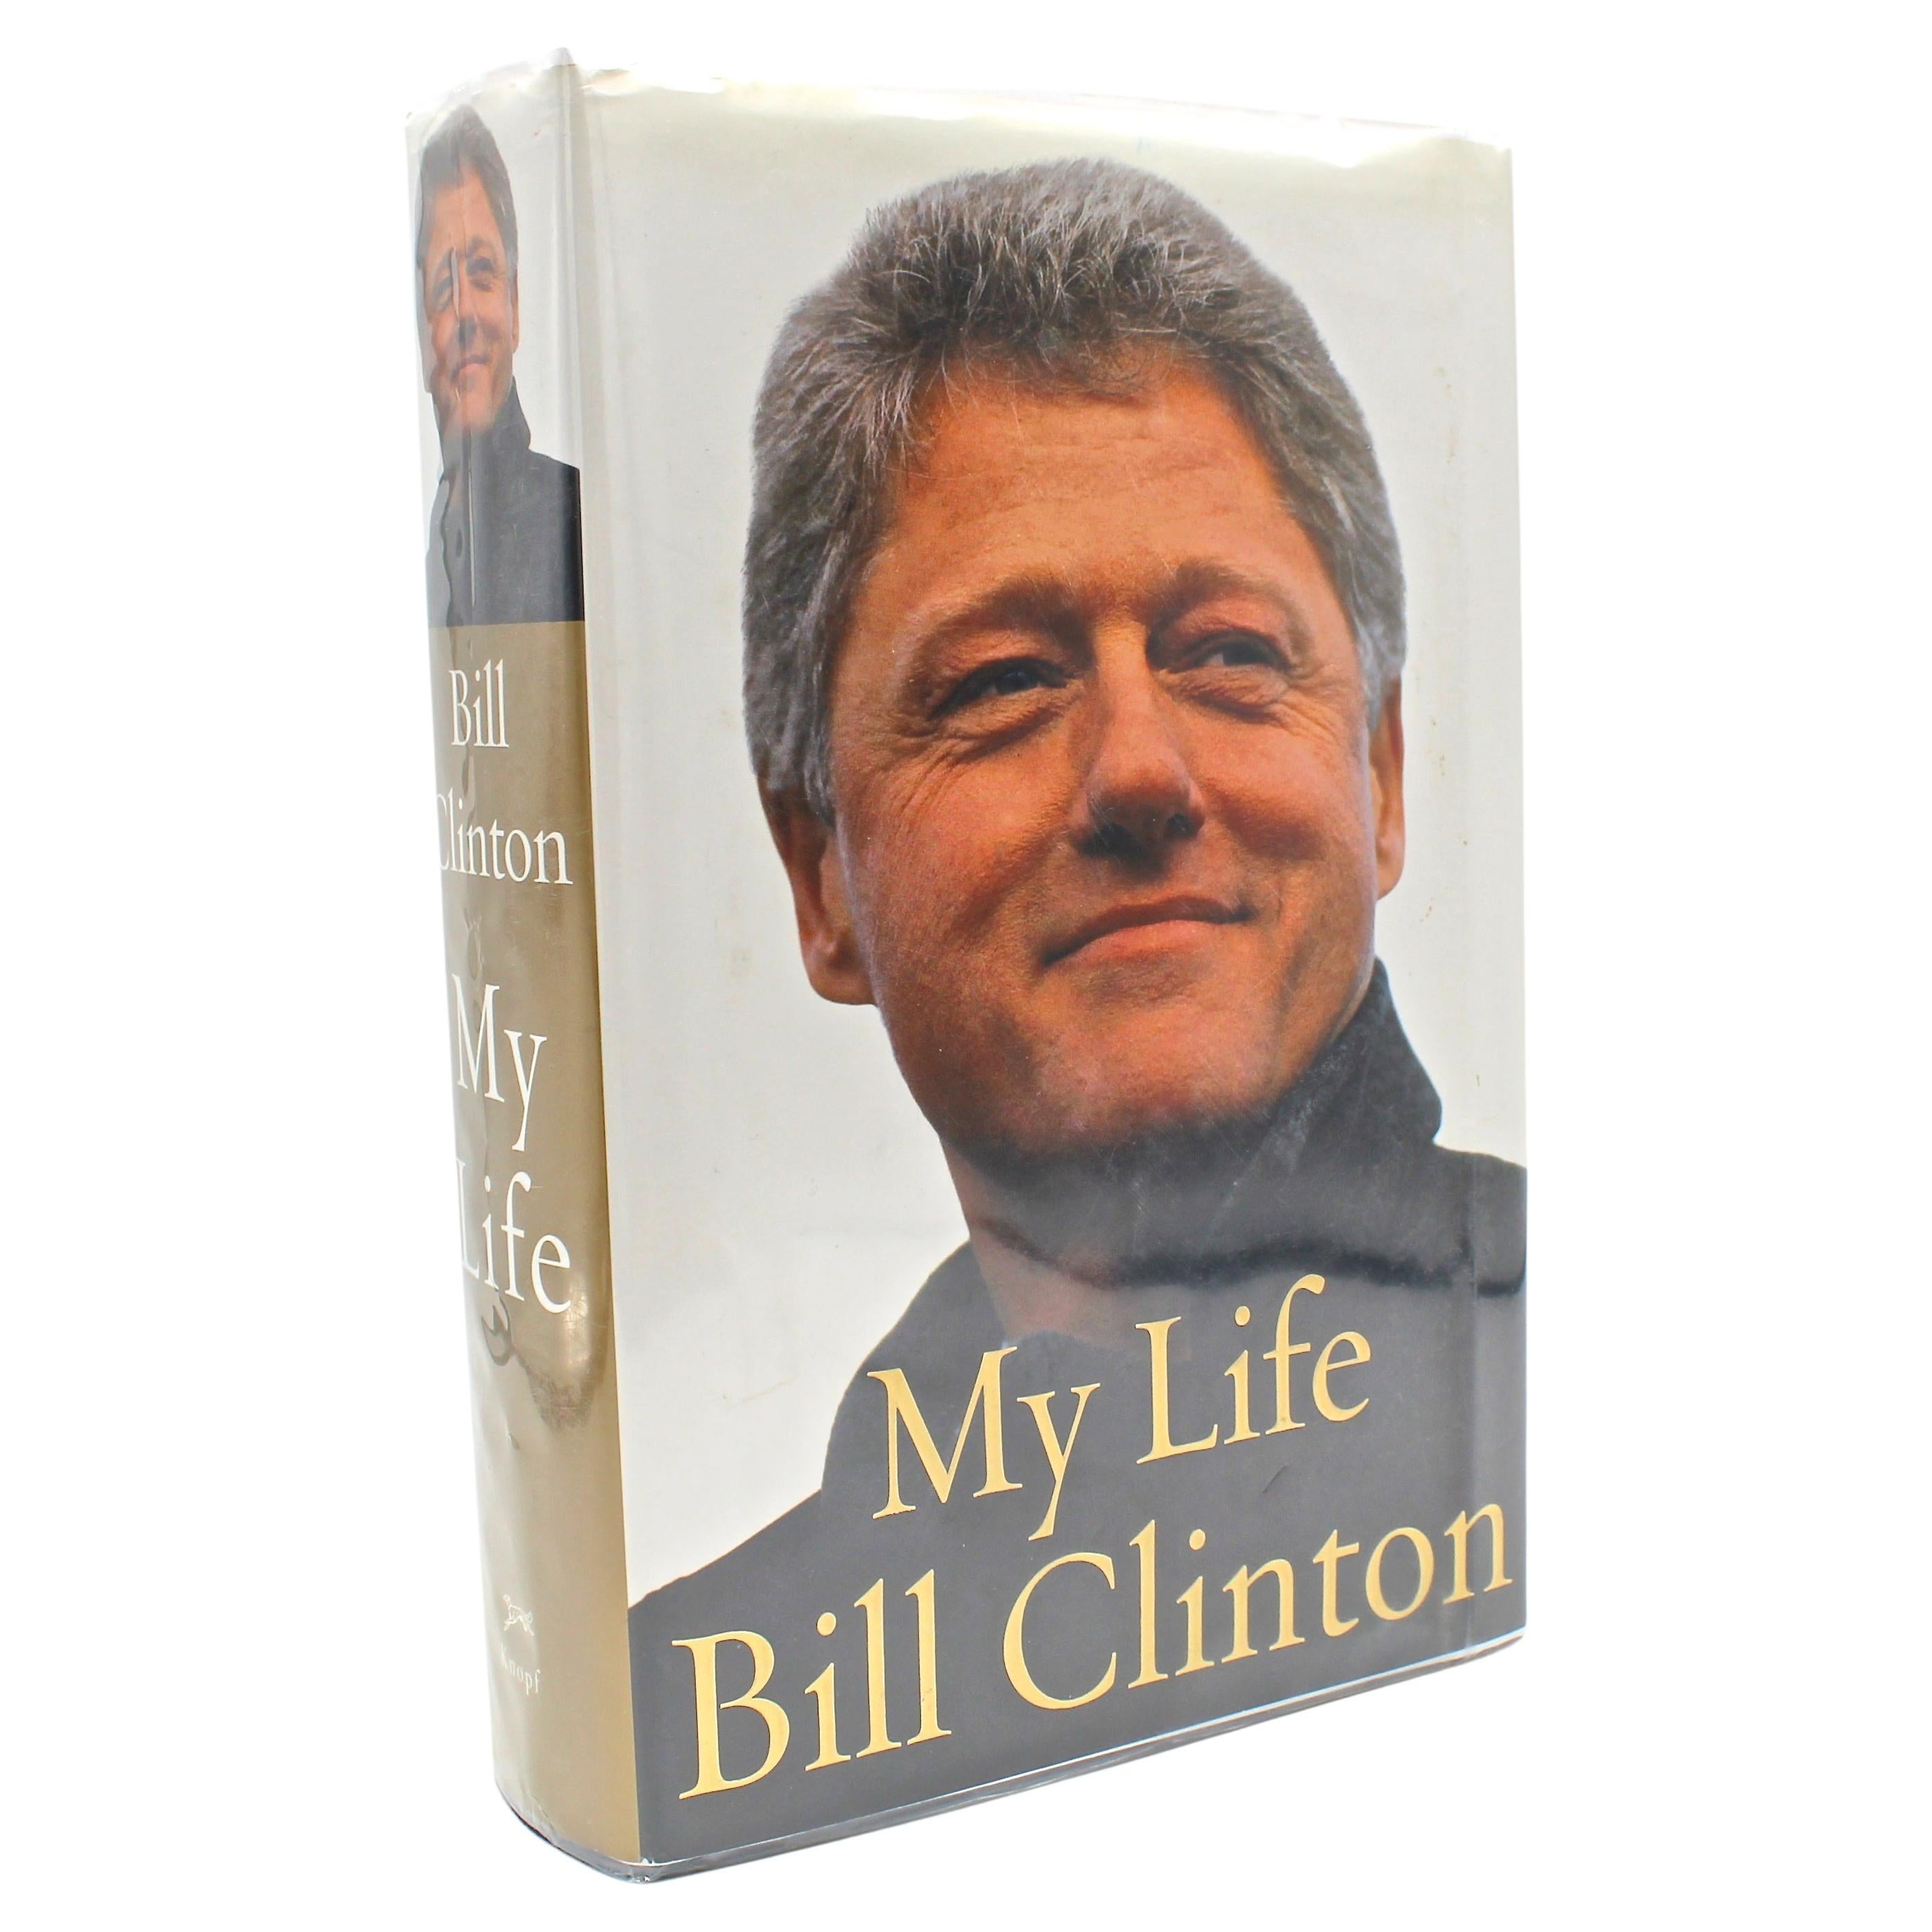 My Life, Signed by Bill Clinton, First Edition, First Printing, 2004 For Sale